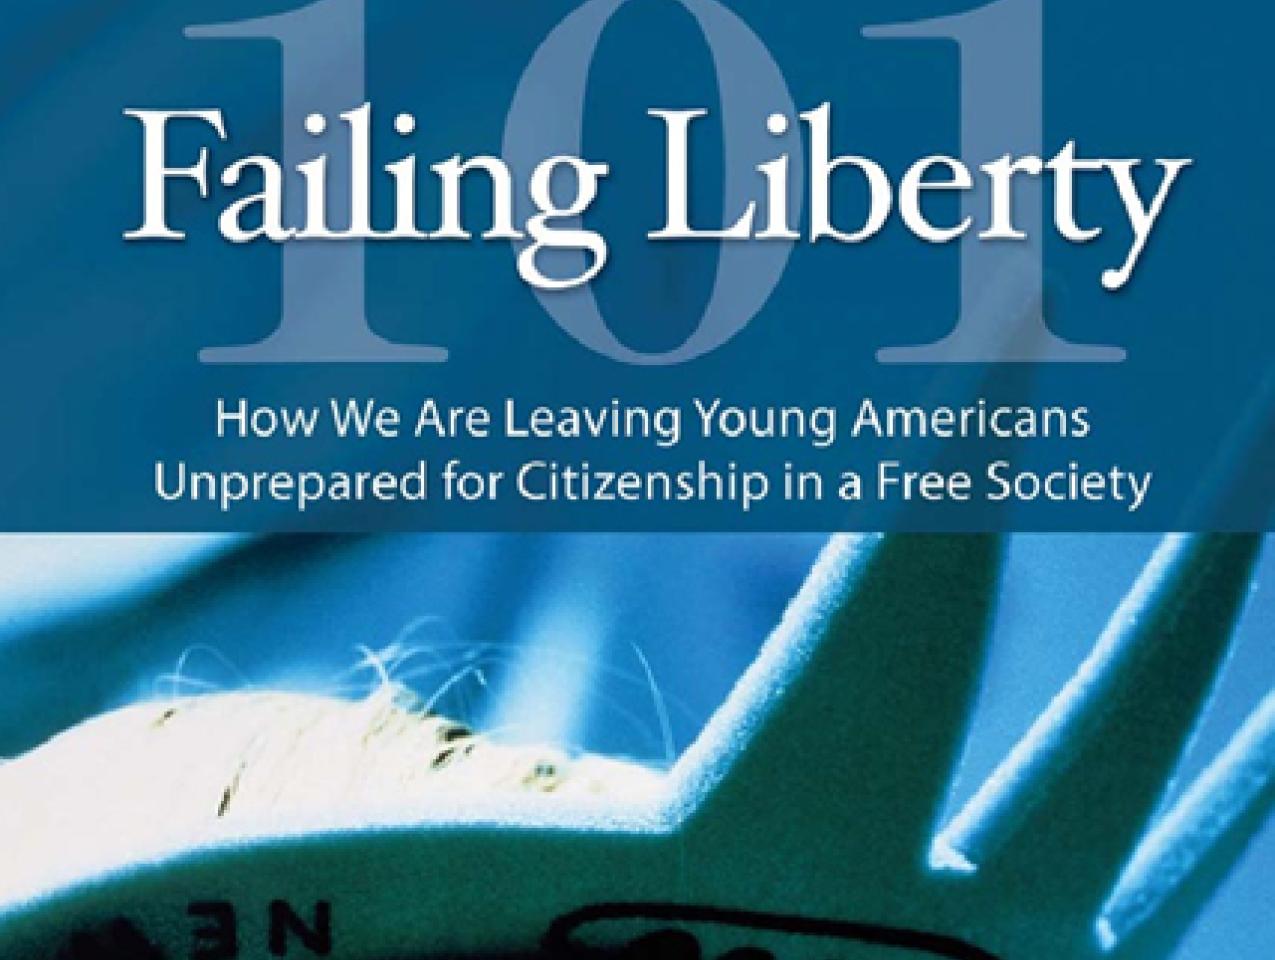 Failing Liberty 101: How We Are Leaving Young Americans Unprepared for Citizensh